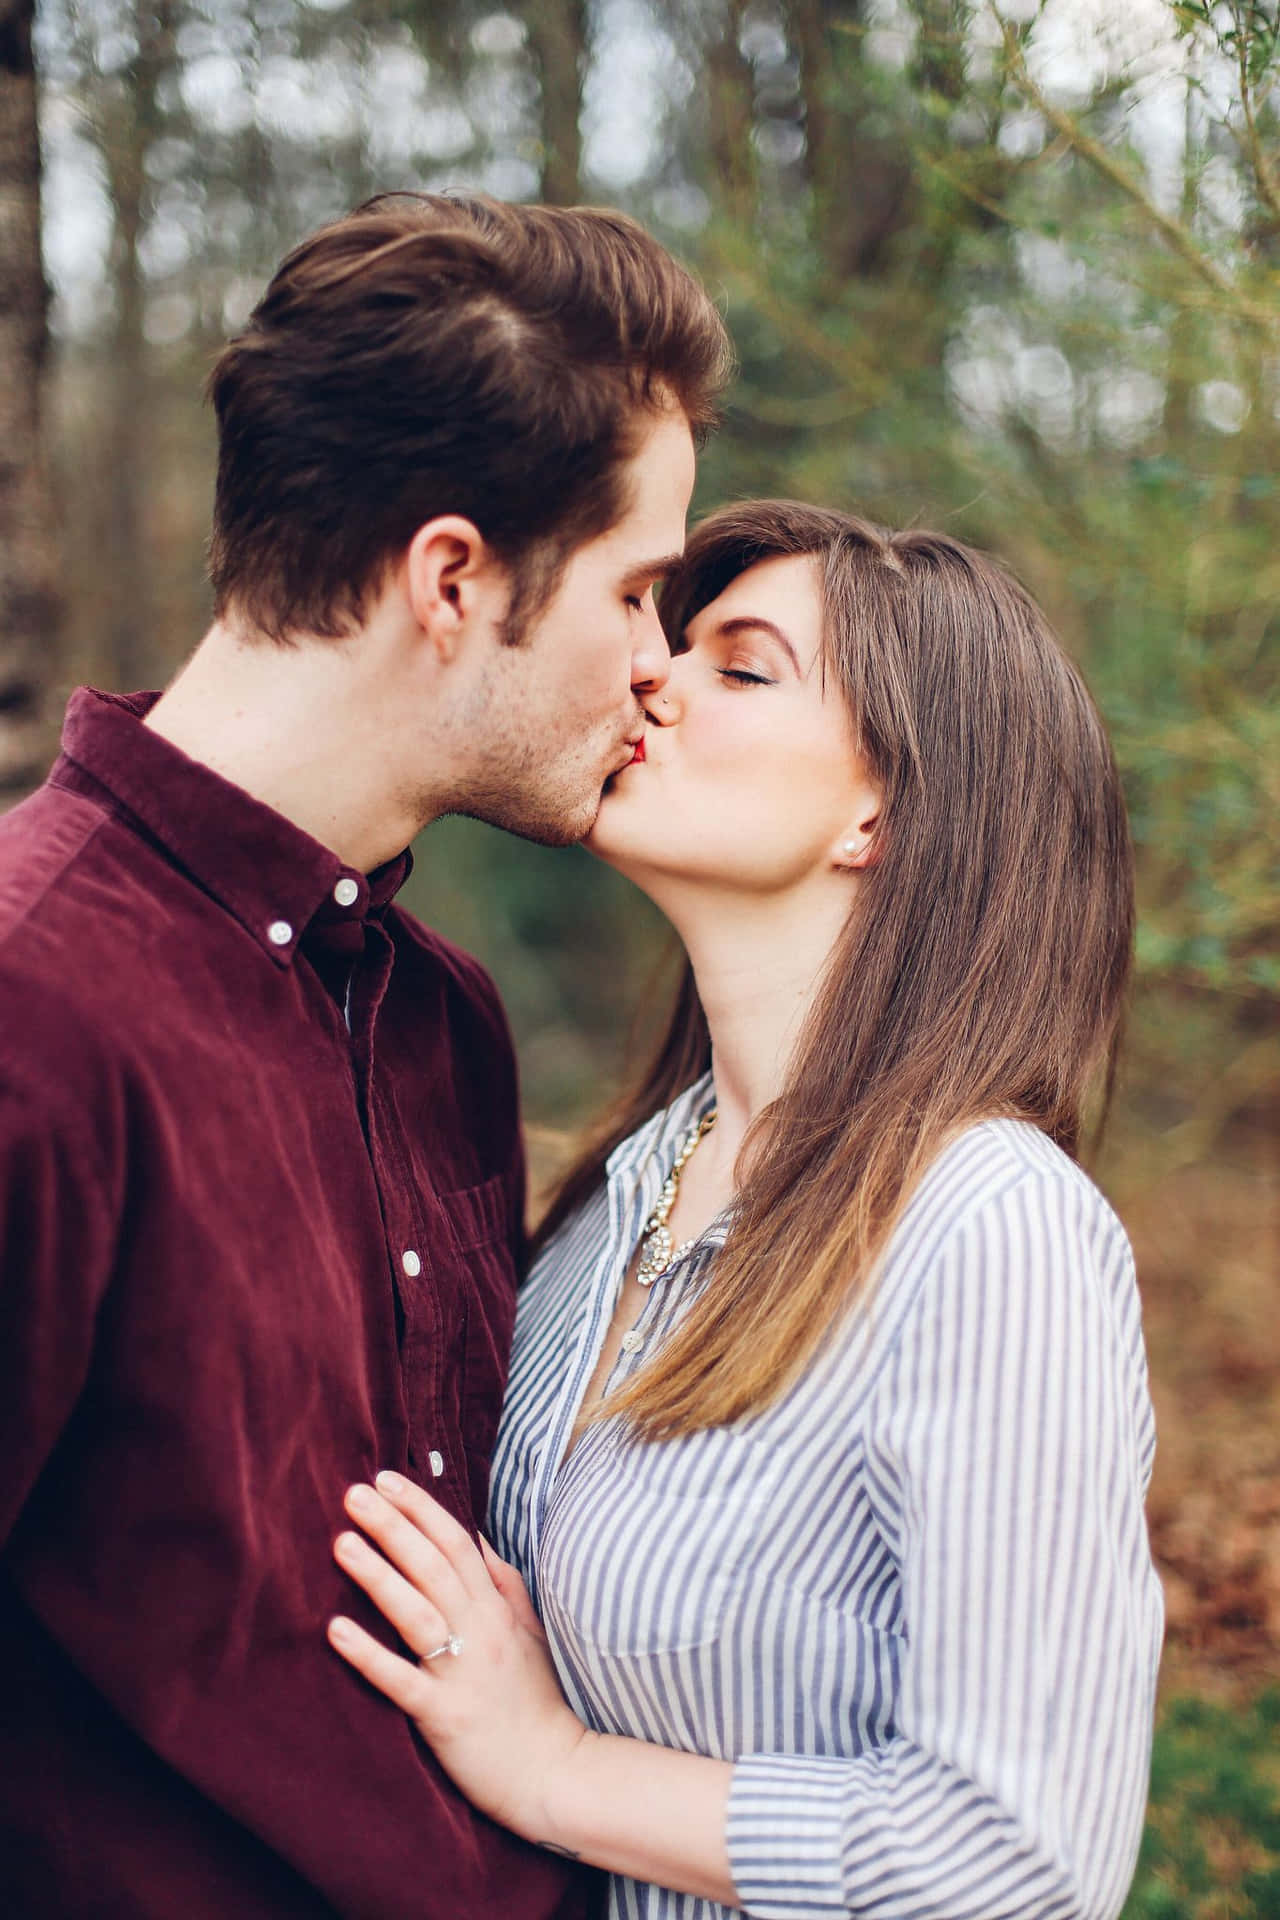 50 Romantic Couple Poses to Get Cute Couple Photos (+5 FREEBIES)